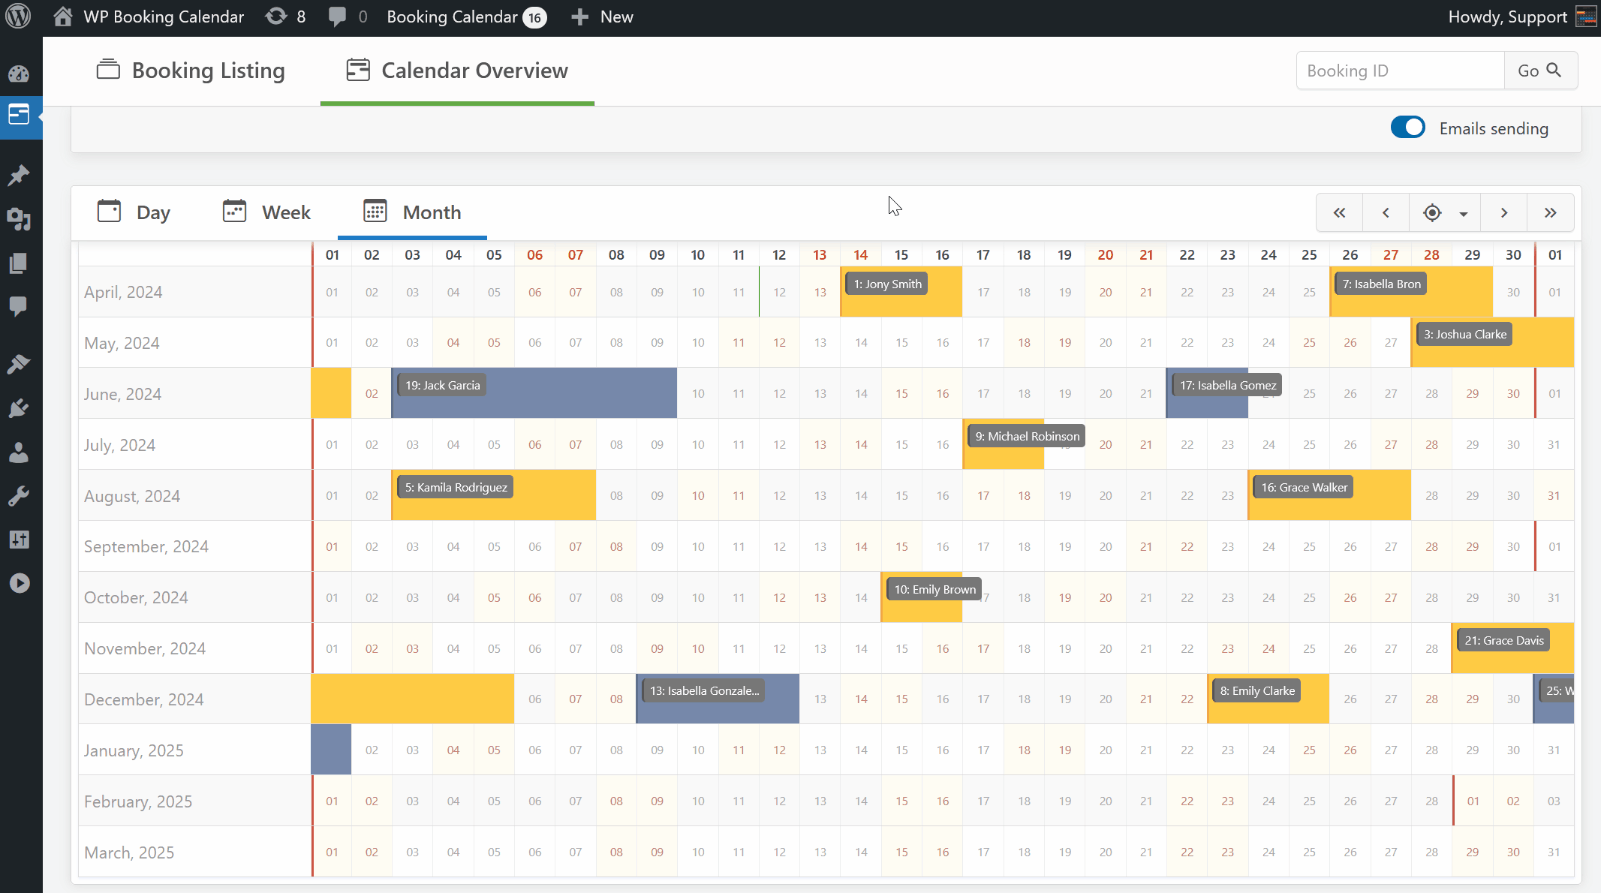 **Calendar Overview**: Easily review all your bookings for the year/weeks/days through an intuitive interface with quick action buttons.